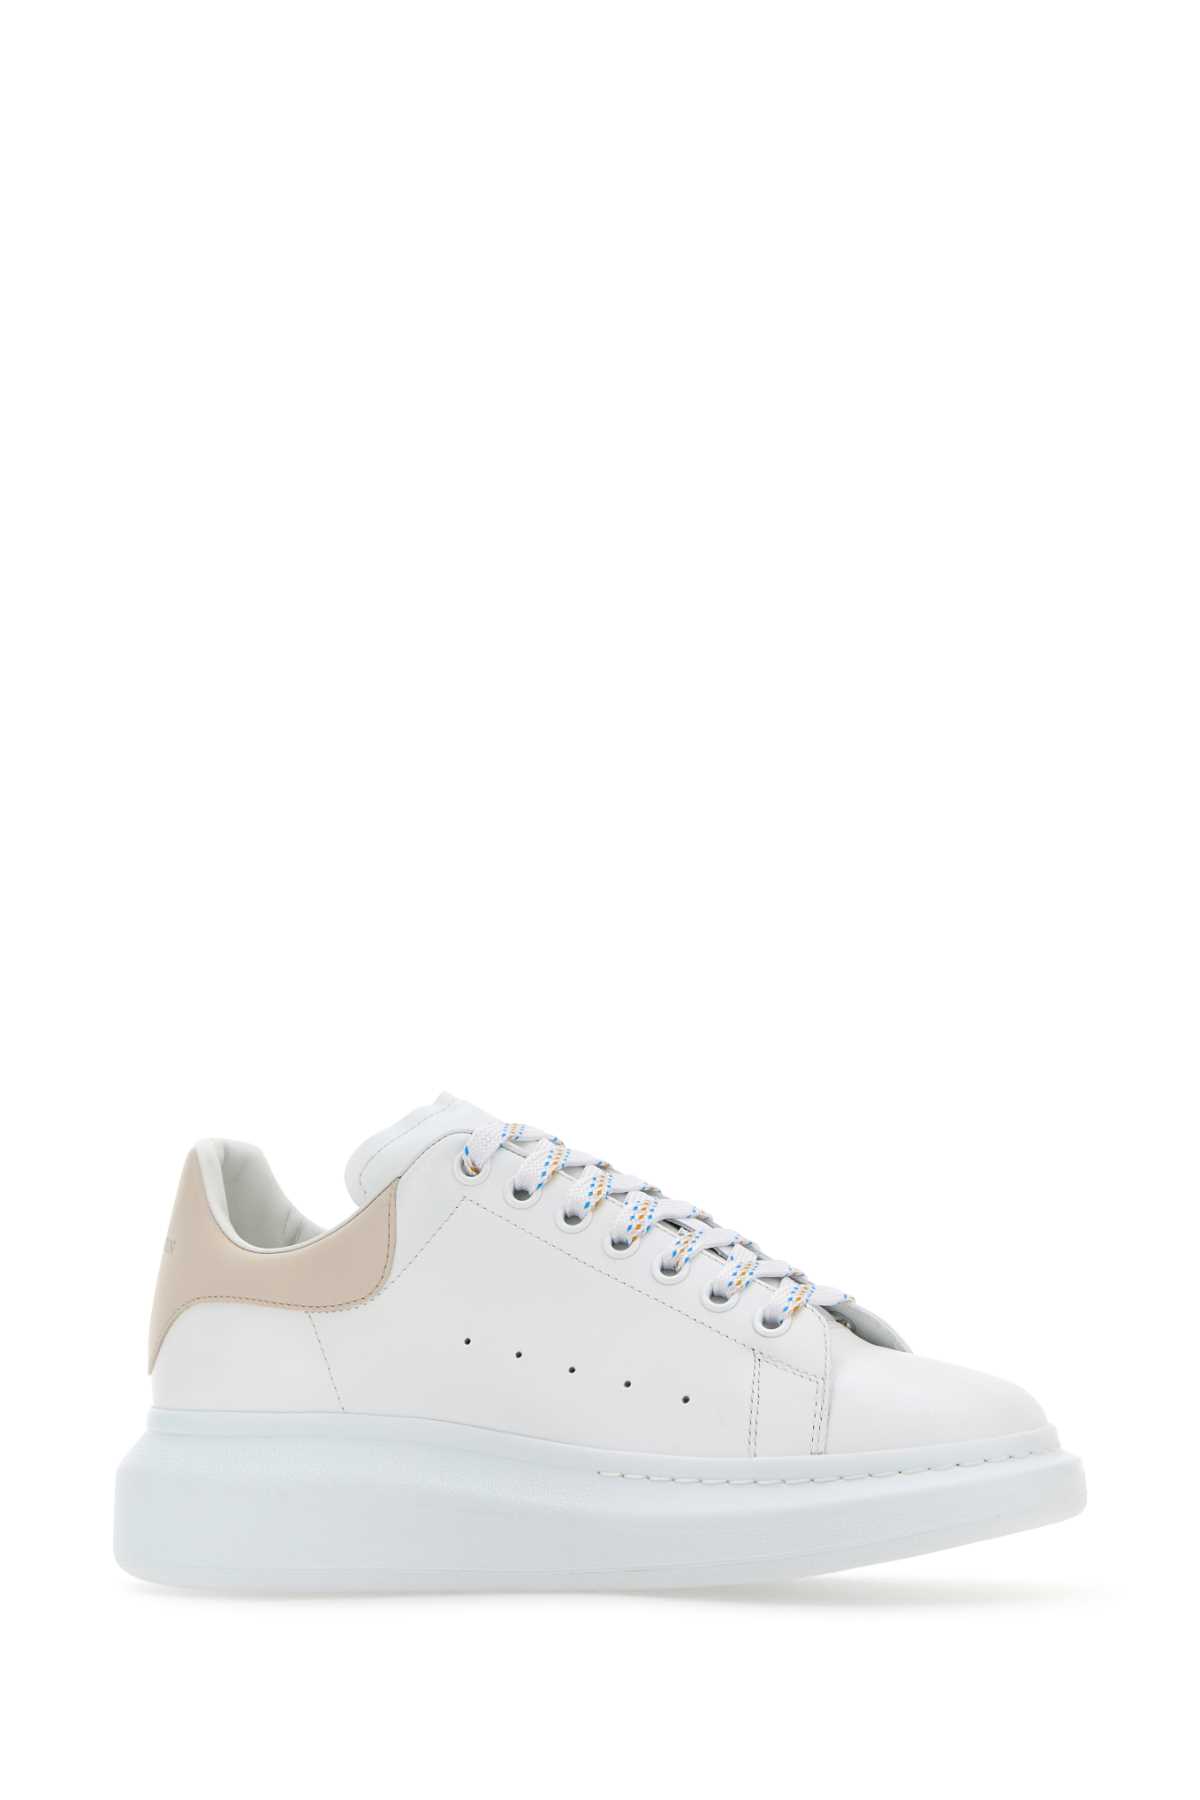 Alexander Mcqueen White Leather Sneakers With Light Pink Leather Hee In Whitetrench